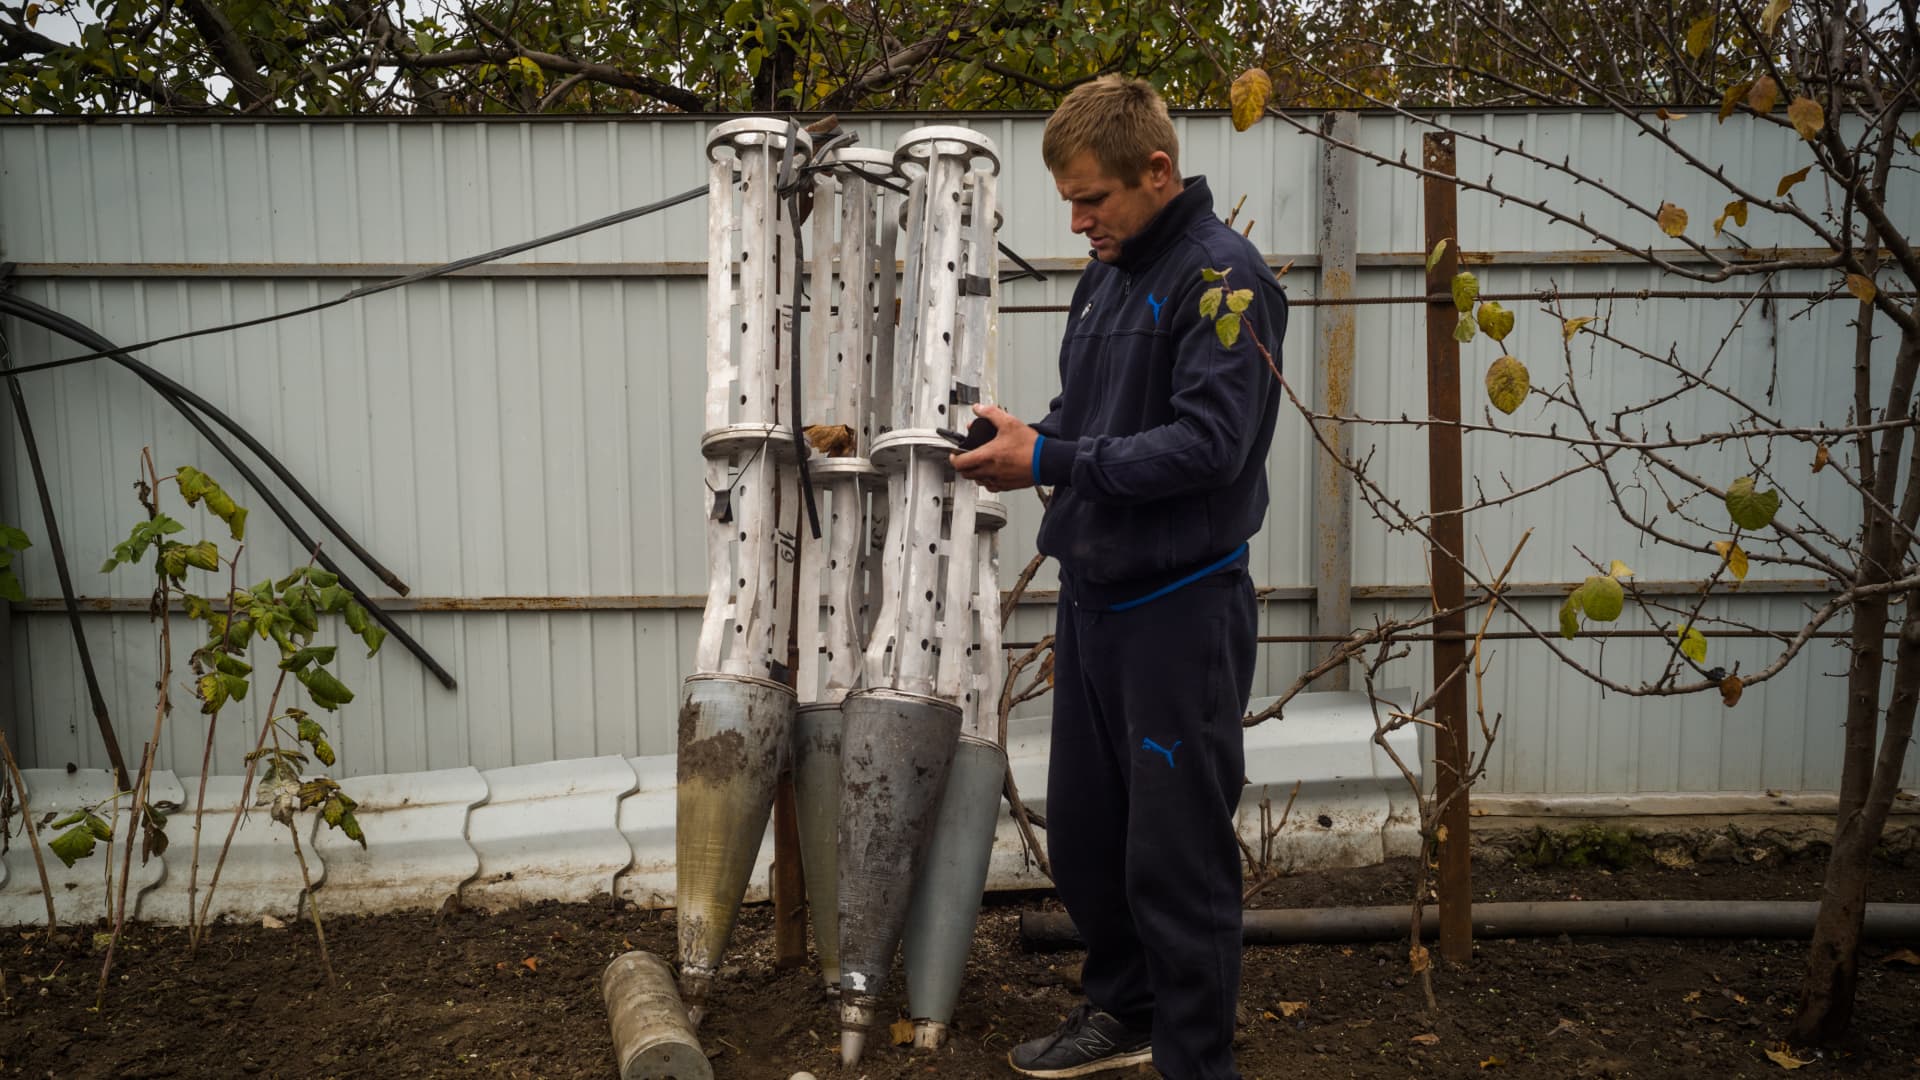 Cluster bombs could turn the war in Ukraine’s favor — but Russia says it’s ready to use them too